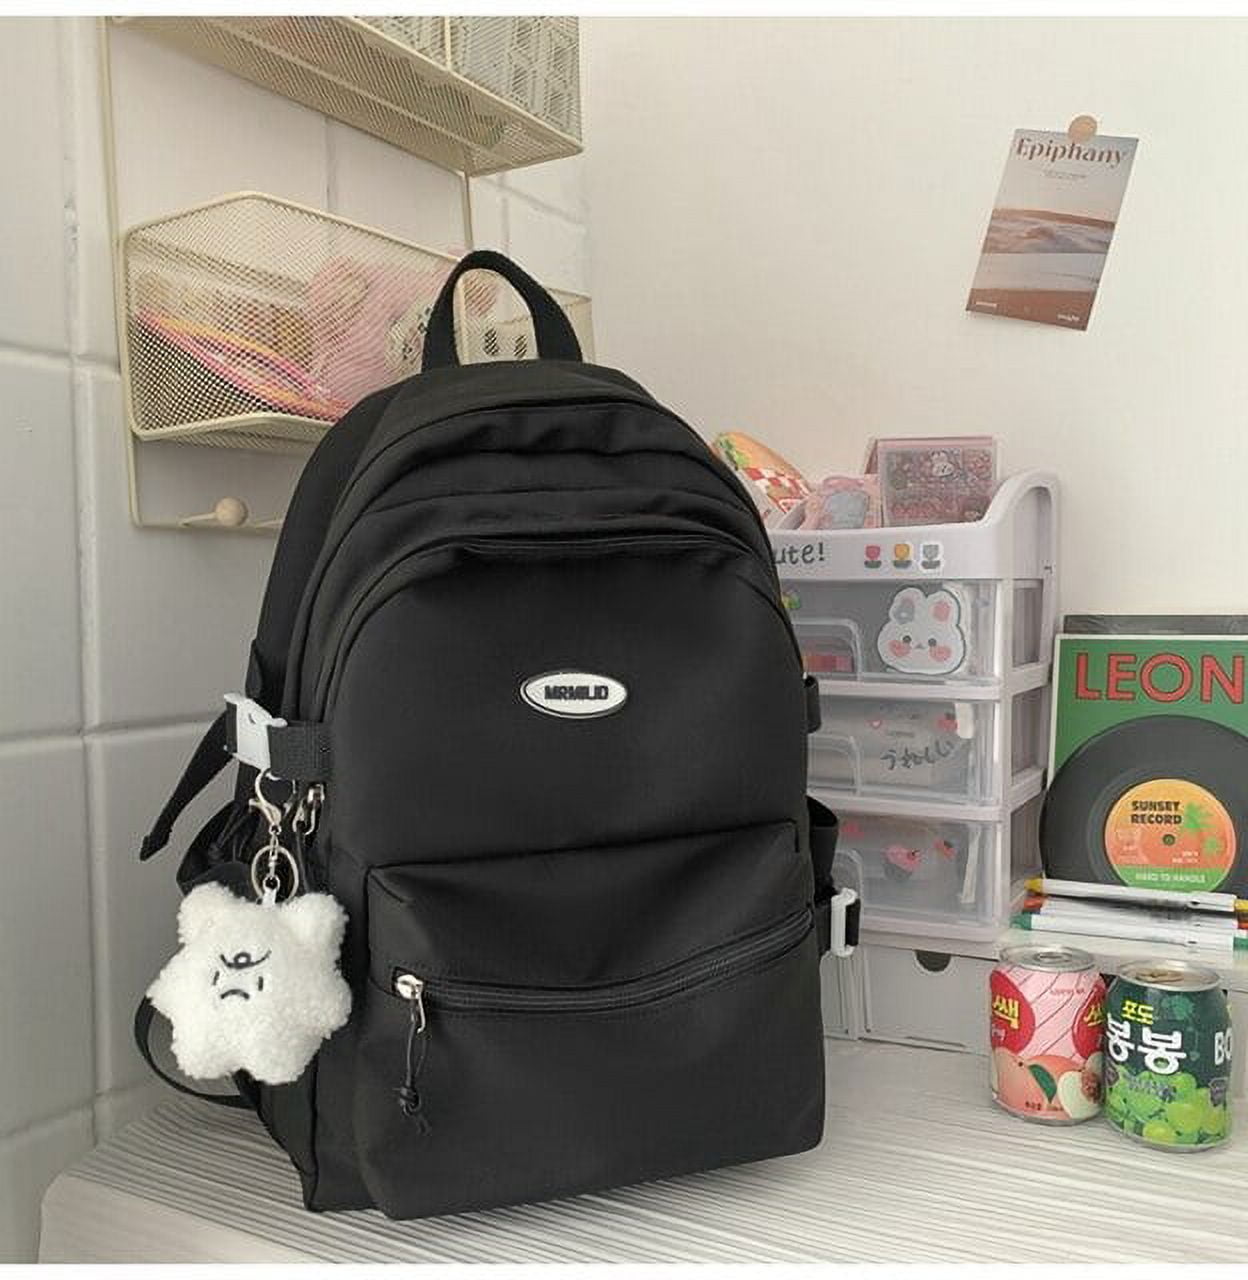 Source Casual student bag backpack ladies school bags for university  students on m.